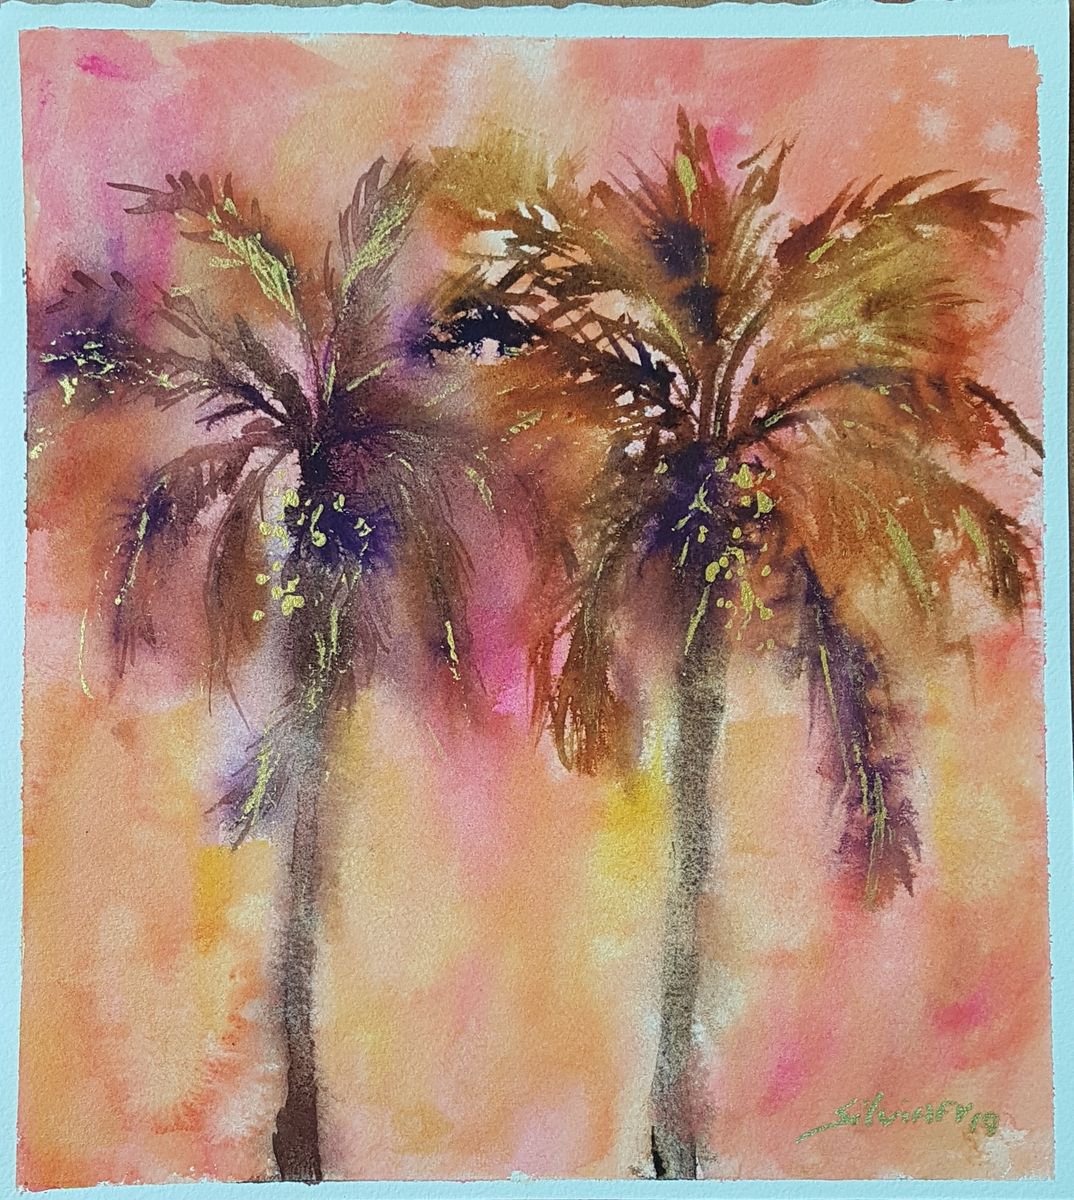 Palm trees in the evening light by Silvia Flores Vitiello